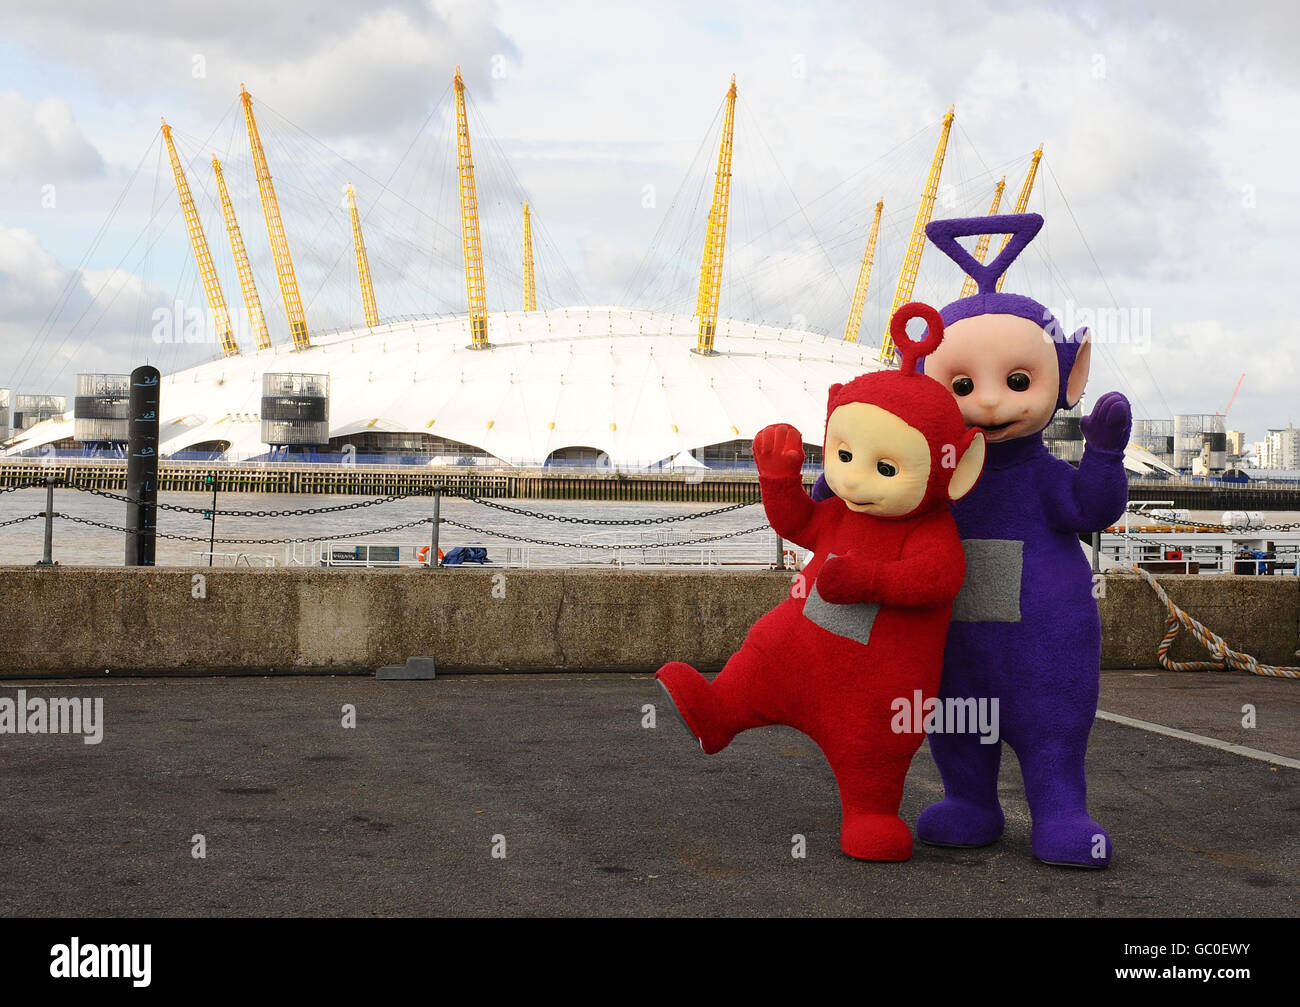 Po (left) and Tinky Winky of the Teletubbies close to the O2 Arena, London. Stock Photo